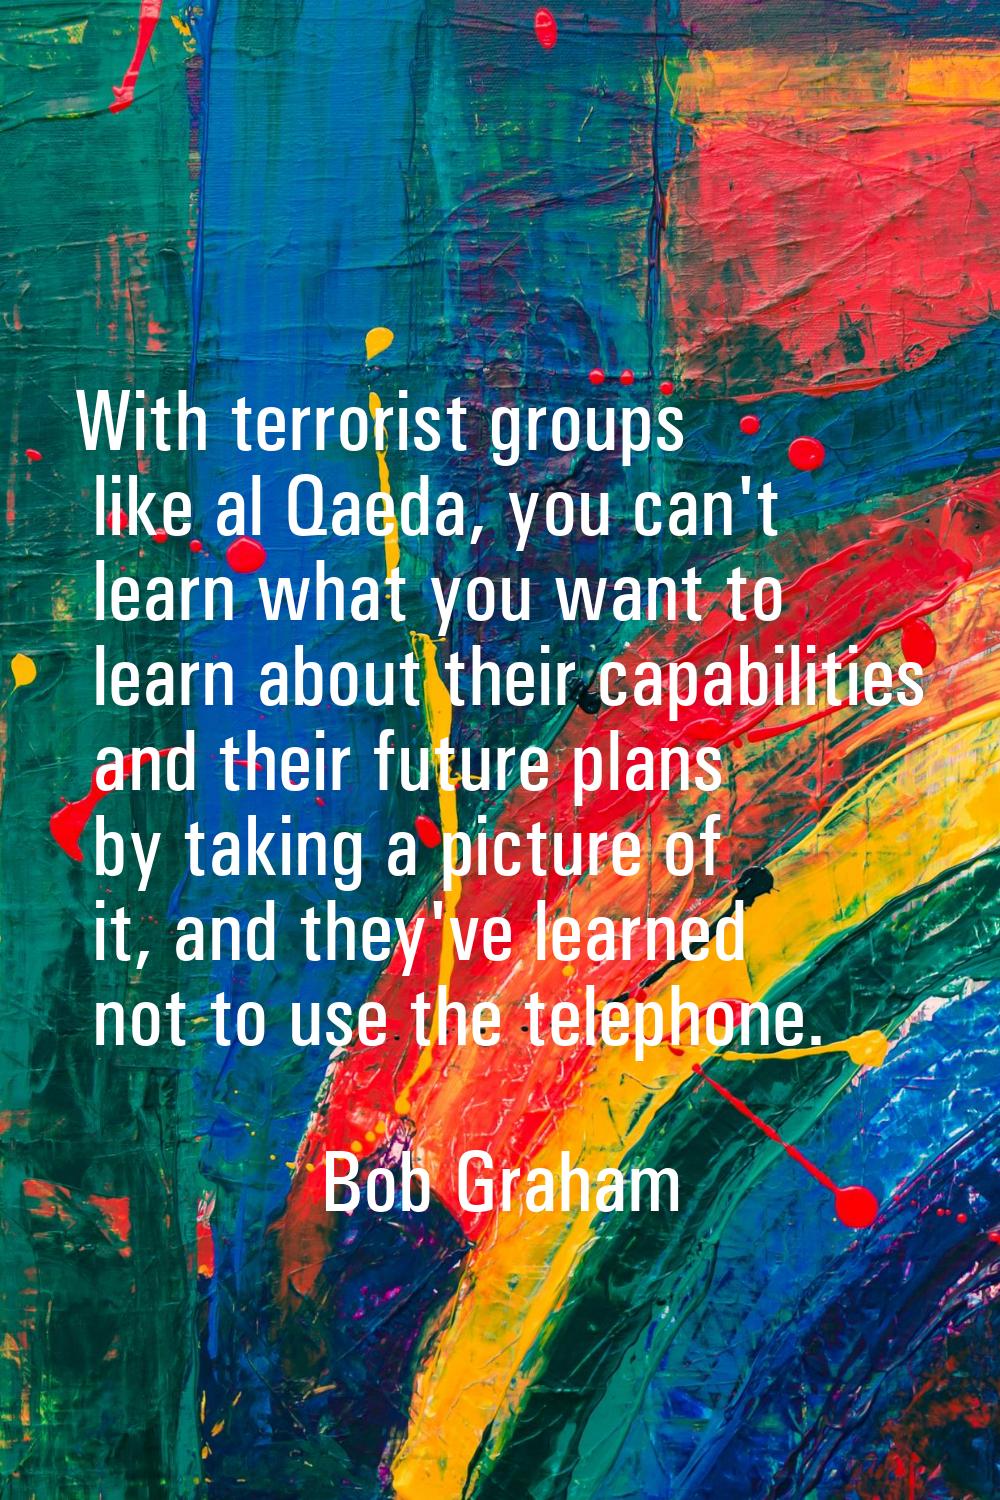 With terrorist groups like al Qaeda, you can't learn what you want to learn about their capabilitie